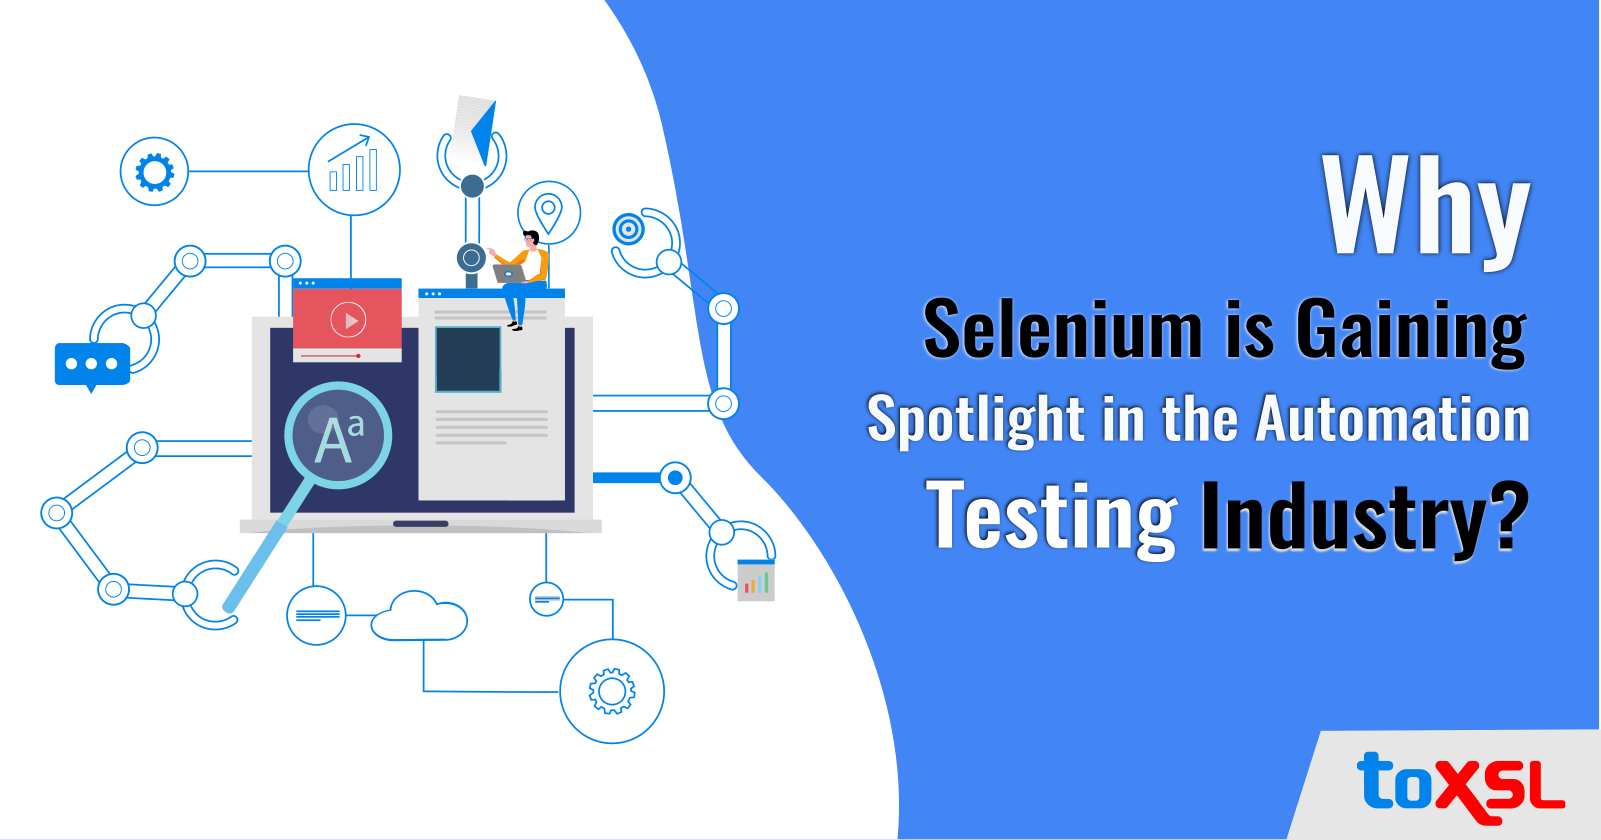 Why Selenium is Gaining Spotlight in the Automation Testing Industry?